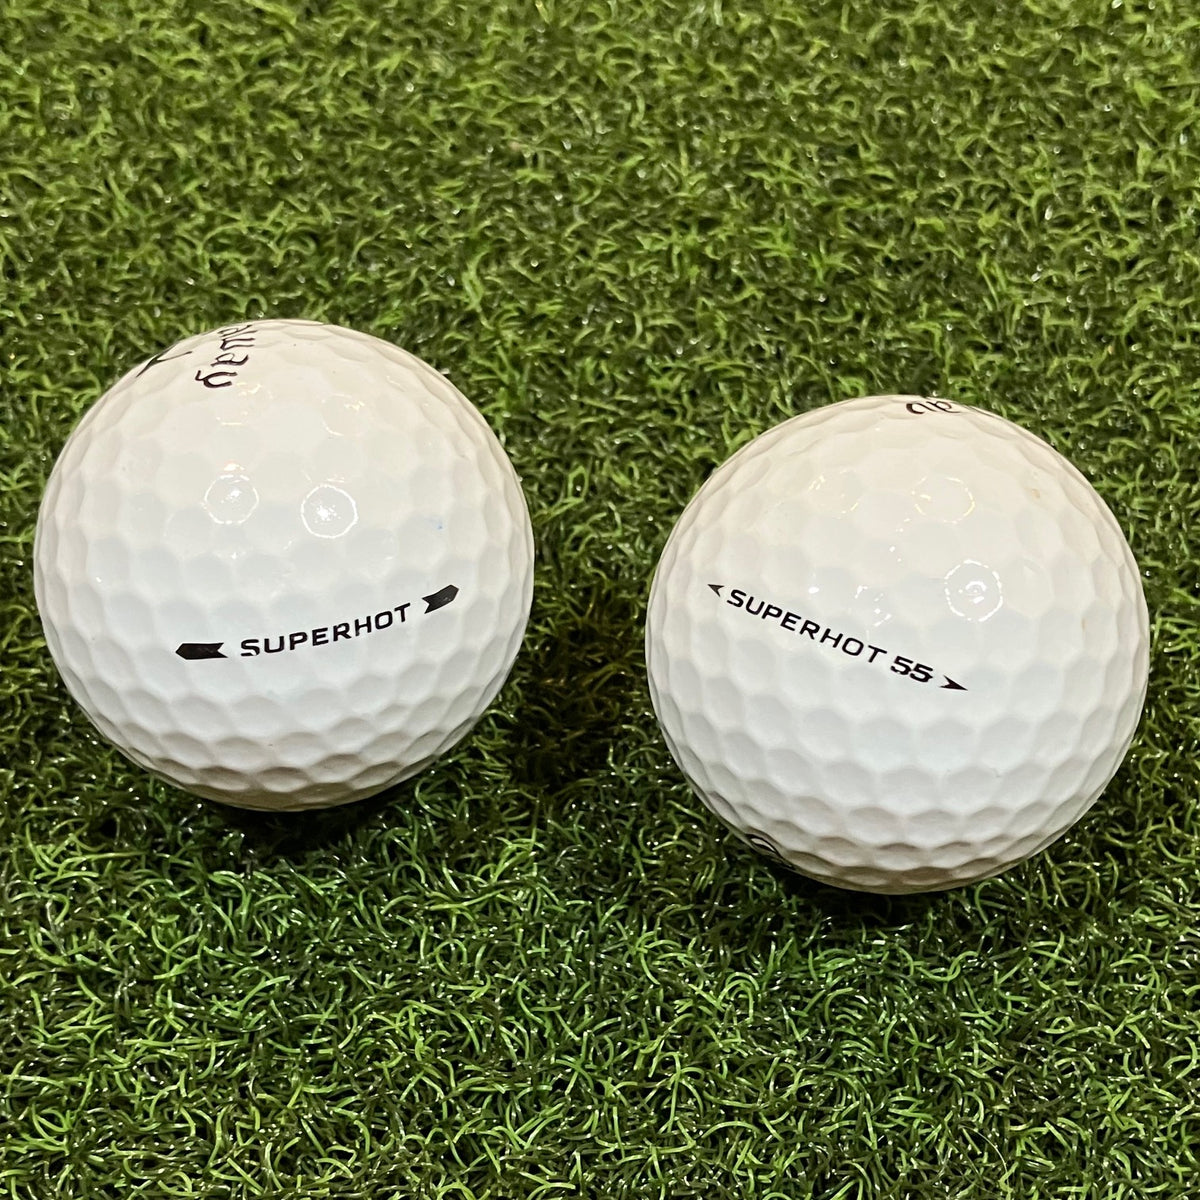 Hands On With The Callaway Superhot Golf Ball in 2023 - Golf Circuit